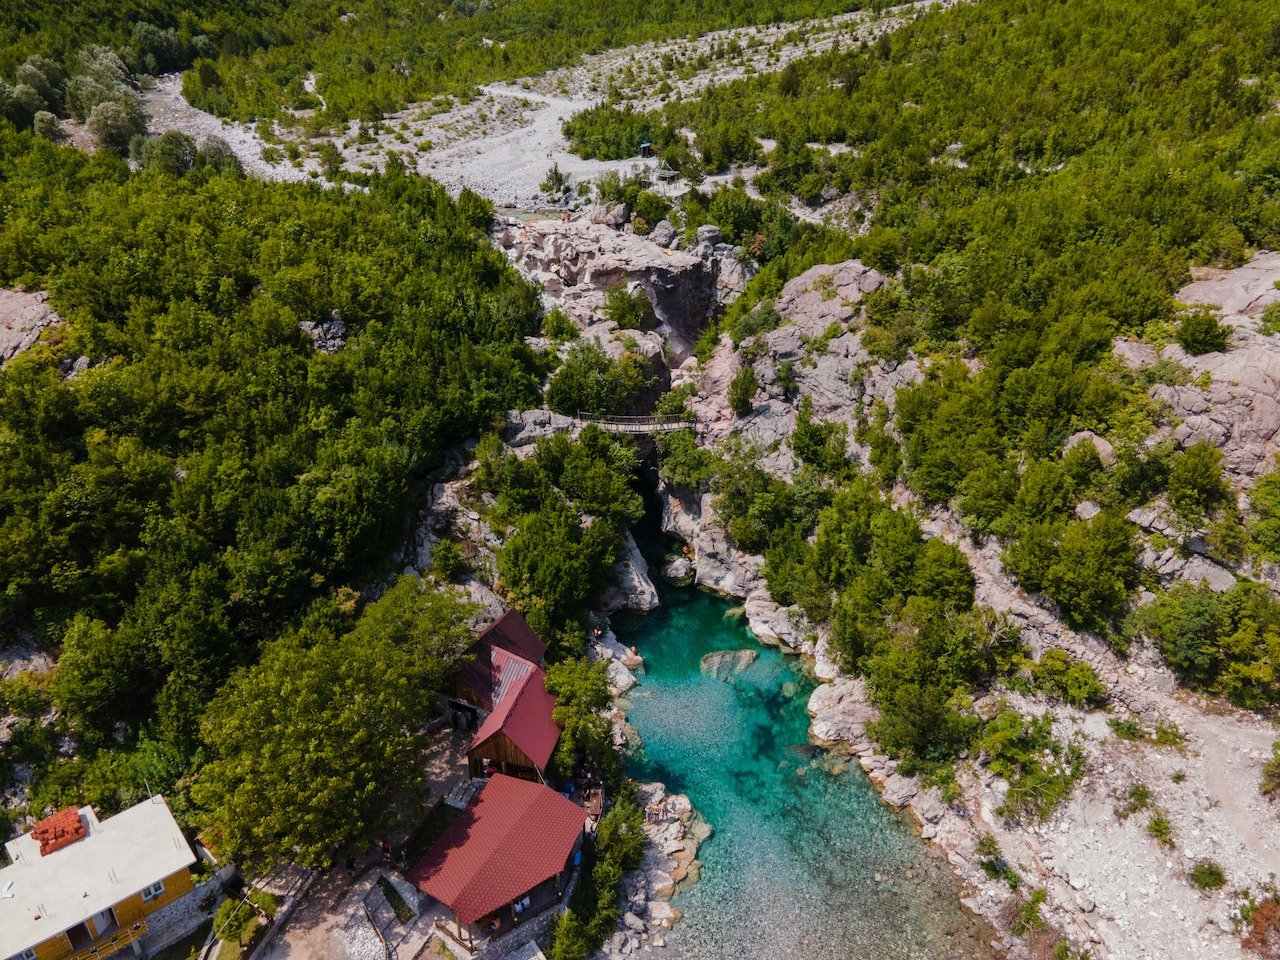 📍 Theth, Albania

The Blue Eye near the village of Kaprre is probably the most well known attraction in Theth. It is part of the Thethi National Park and is essentially a well of 100 square meters and about 5 meters deep. The water source is from th